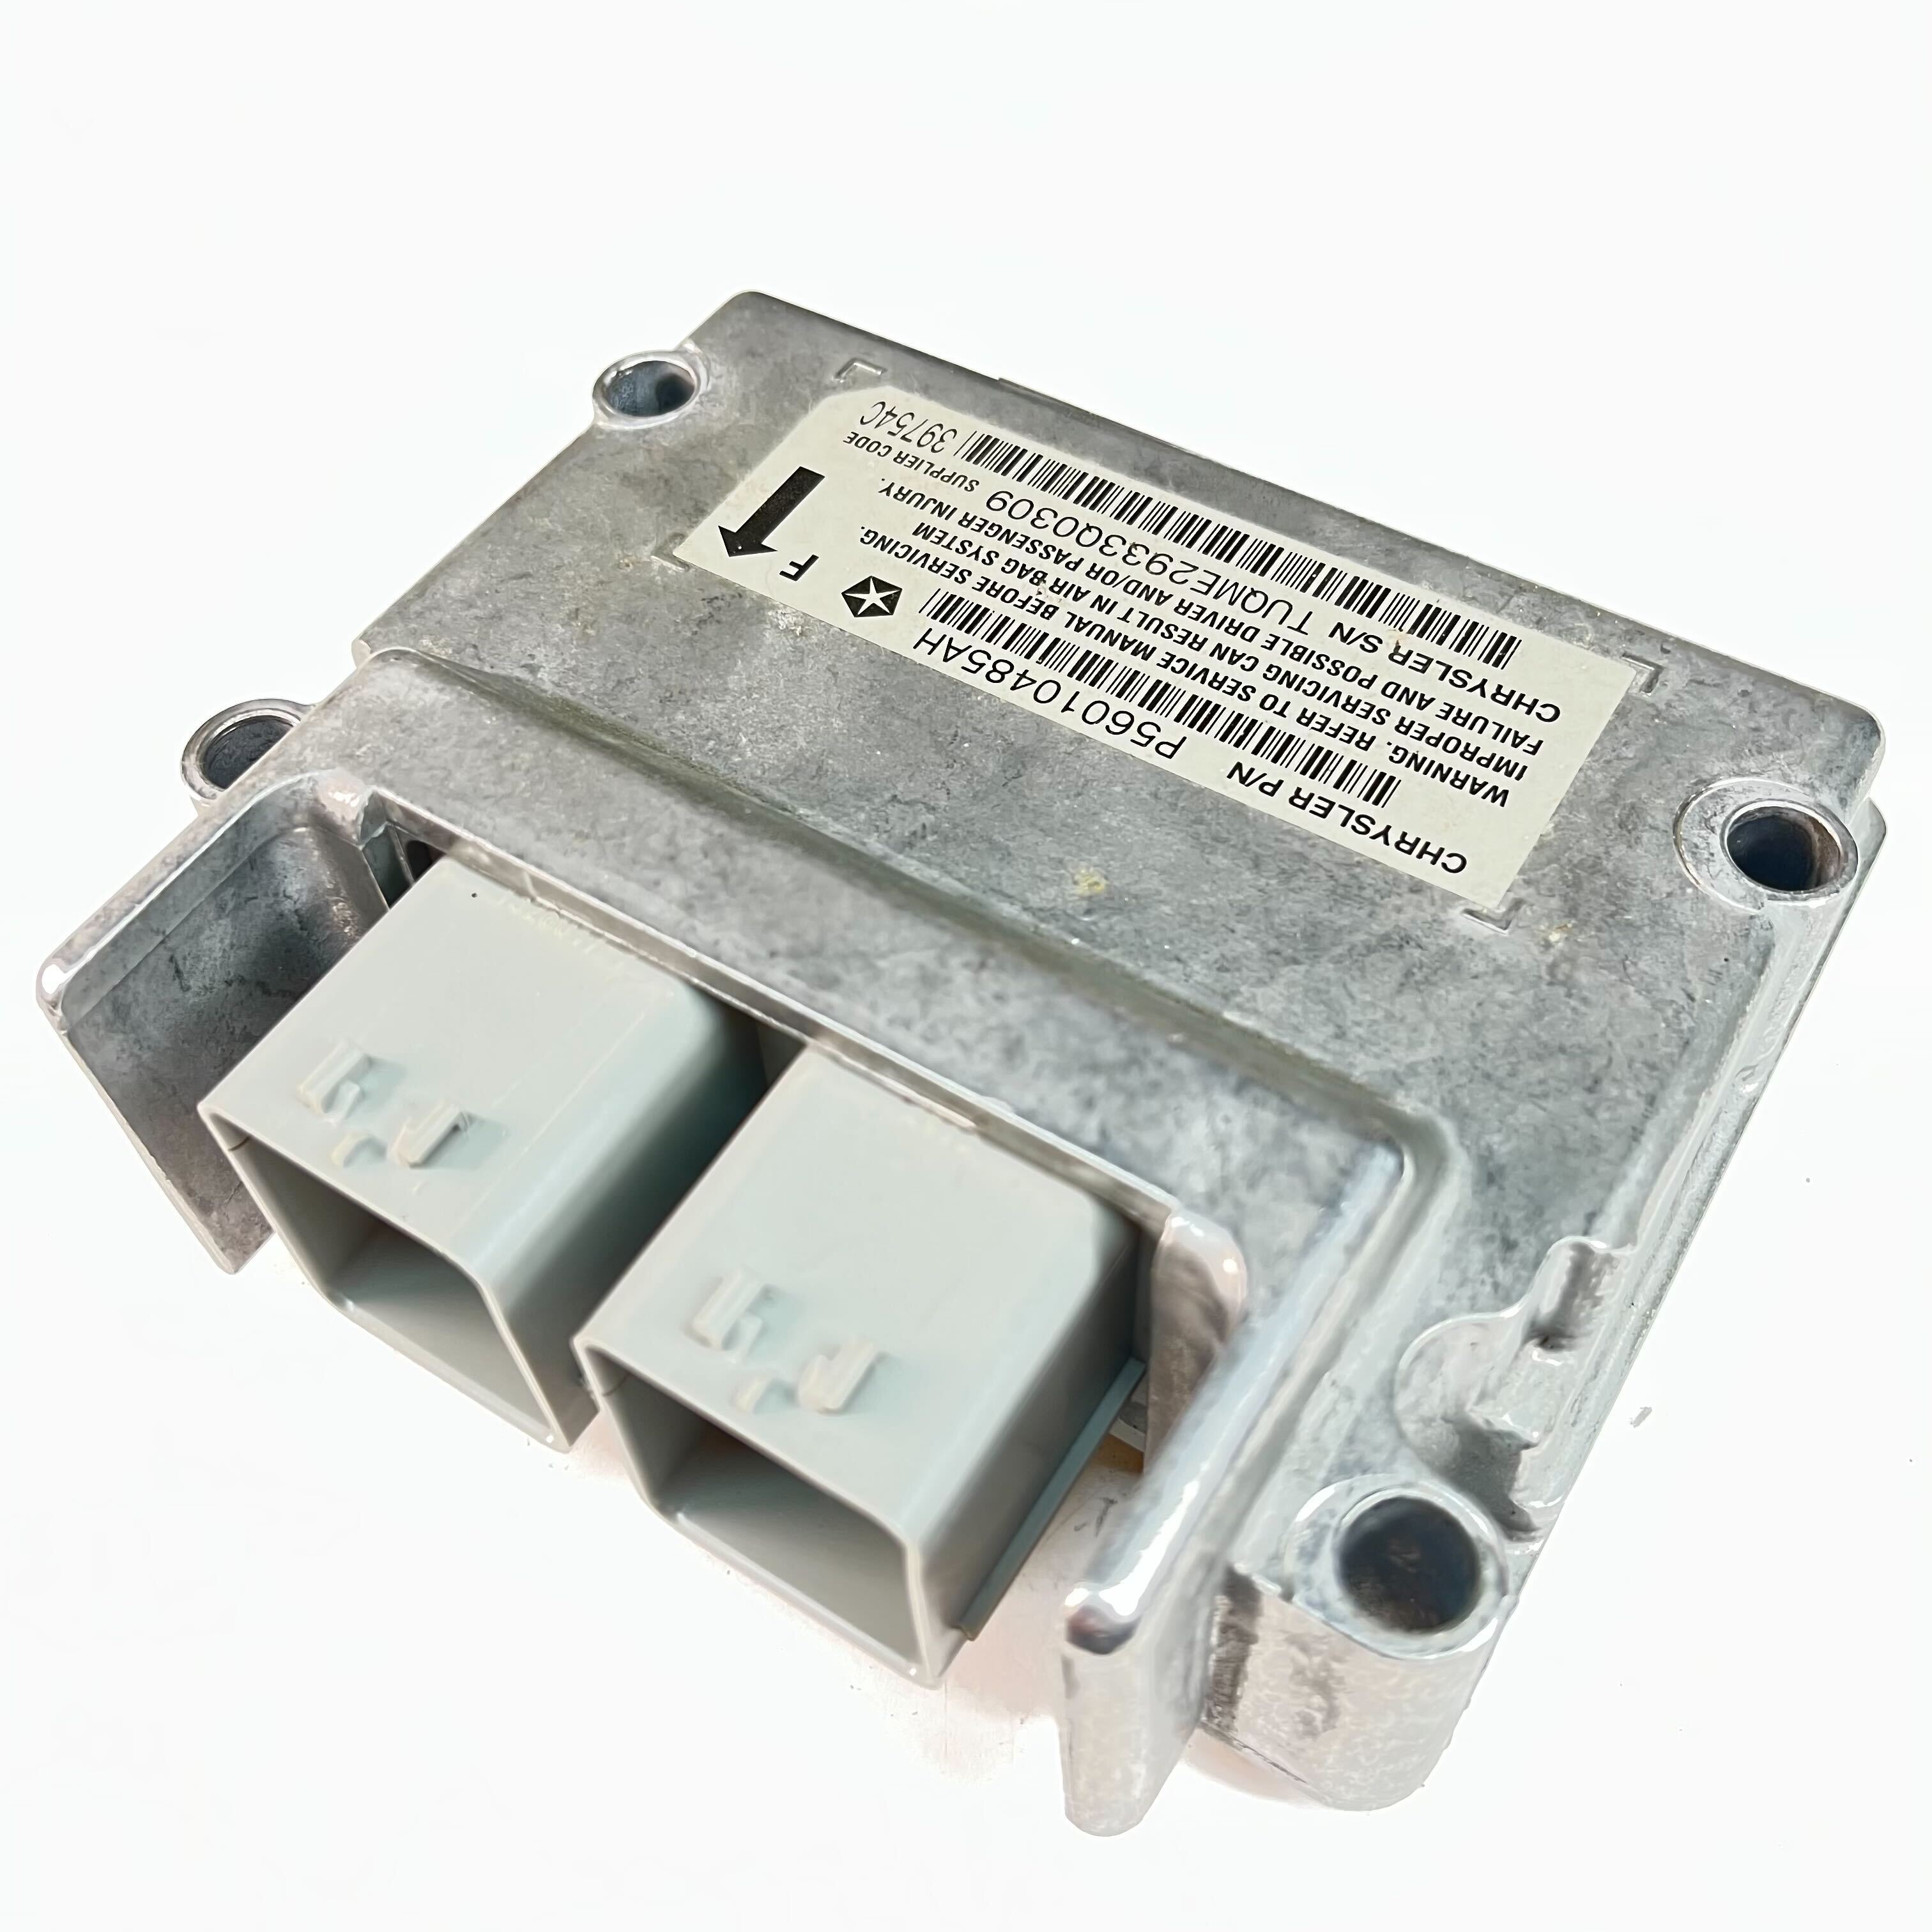 JEEP GRAND CHEROKEE SRS ORC ORM Occupant Control Module - Airbag Computer Control Module PART #P56010485AH